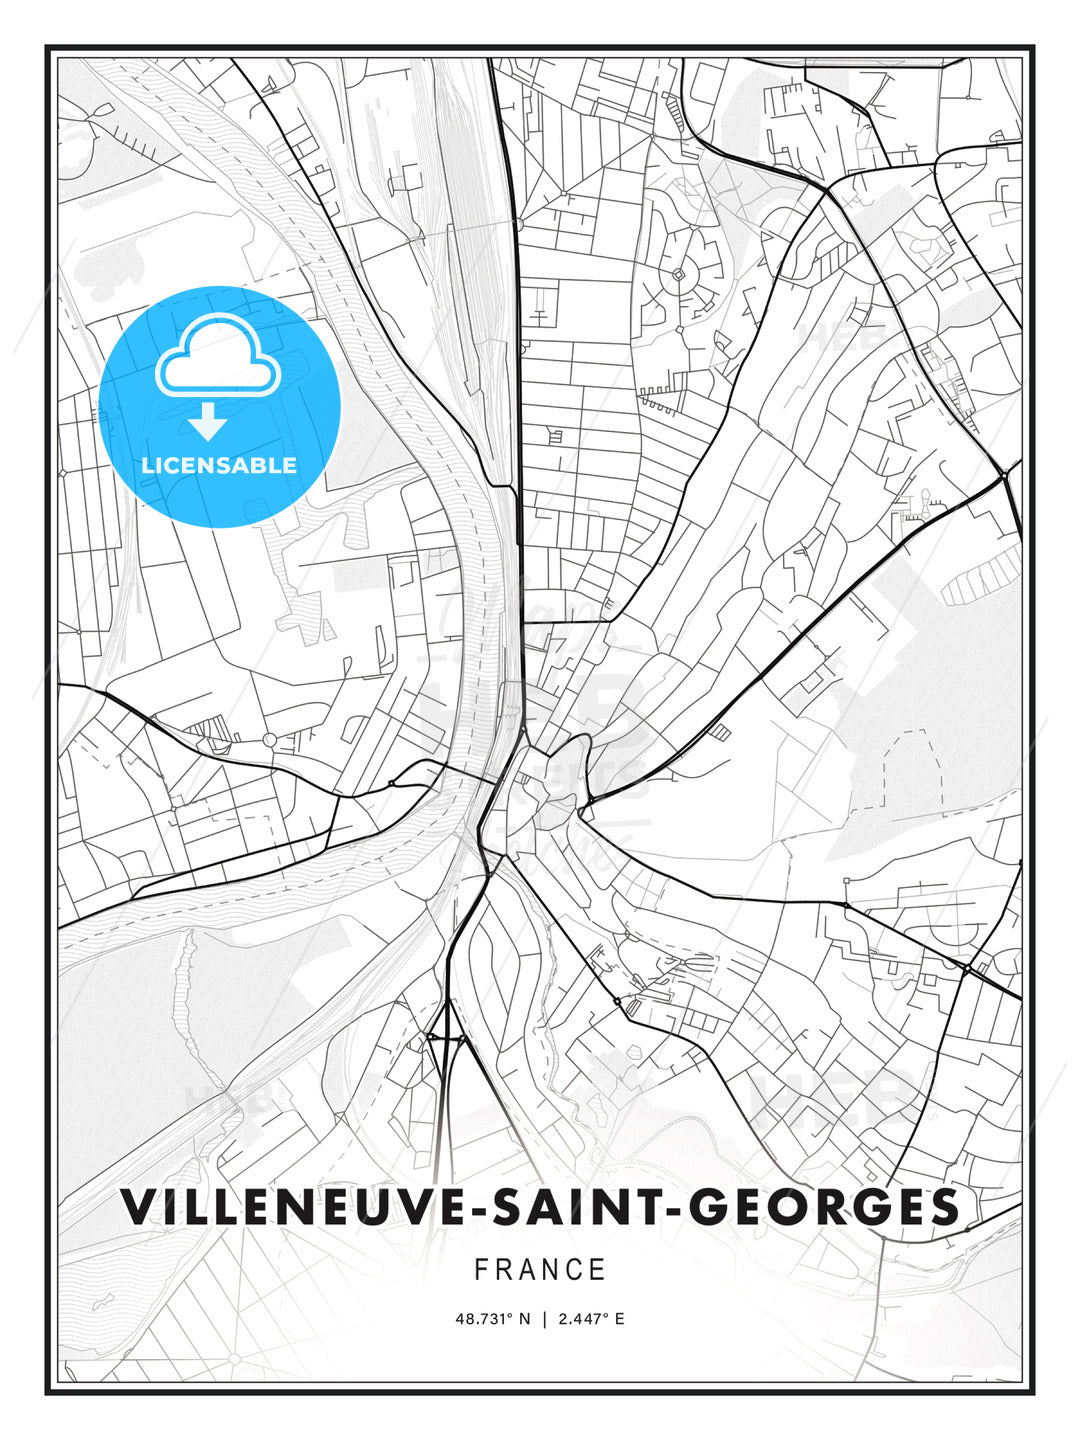 Villeneuve-Saint-Georges, France, Modern Print Template in Various Formats - HEBSTREITS Sketches